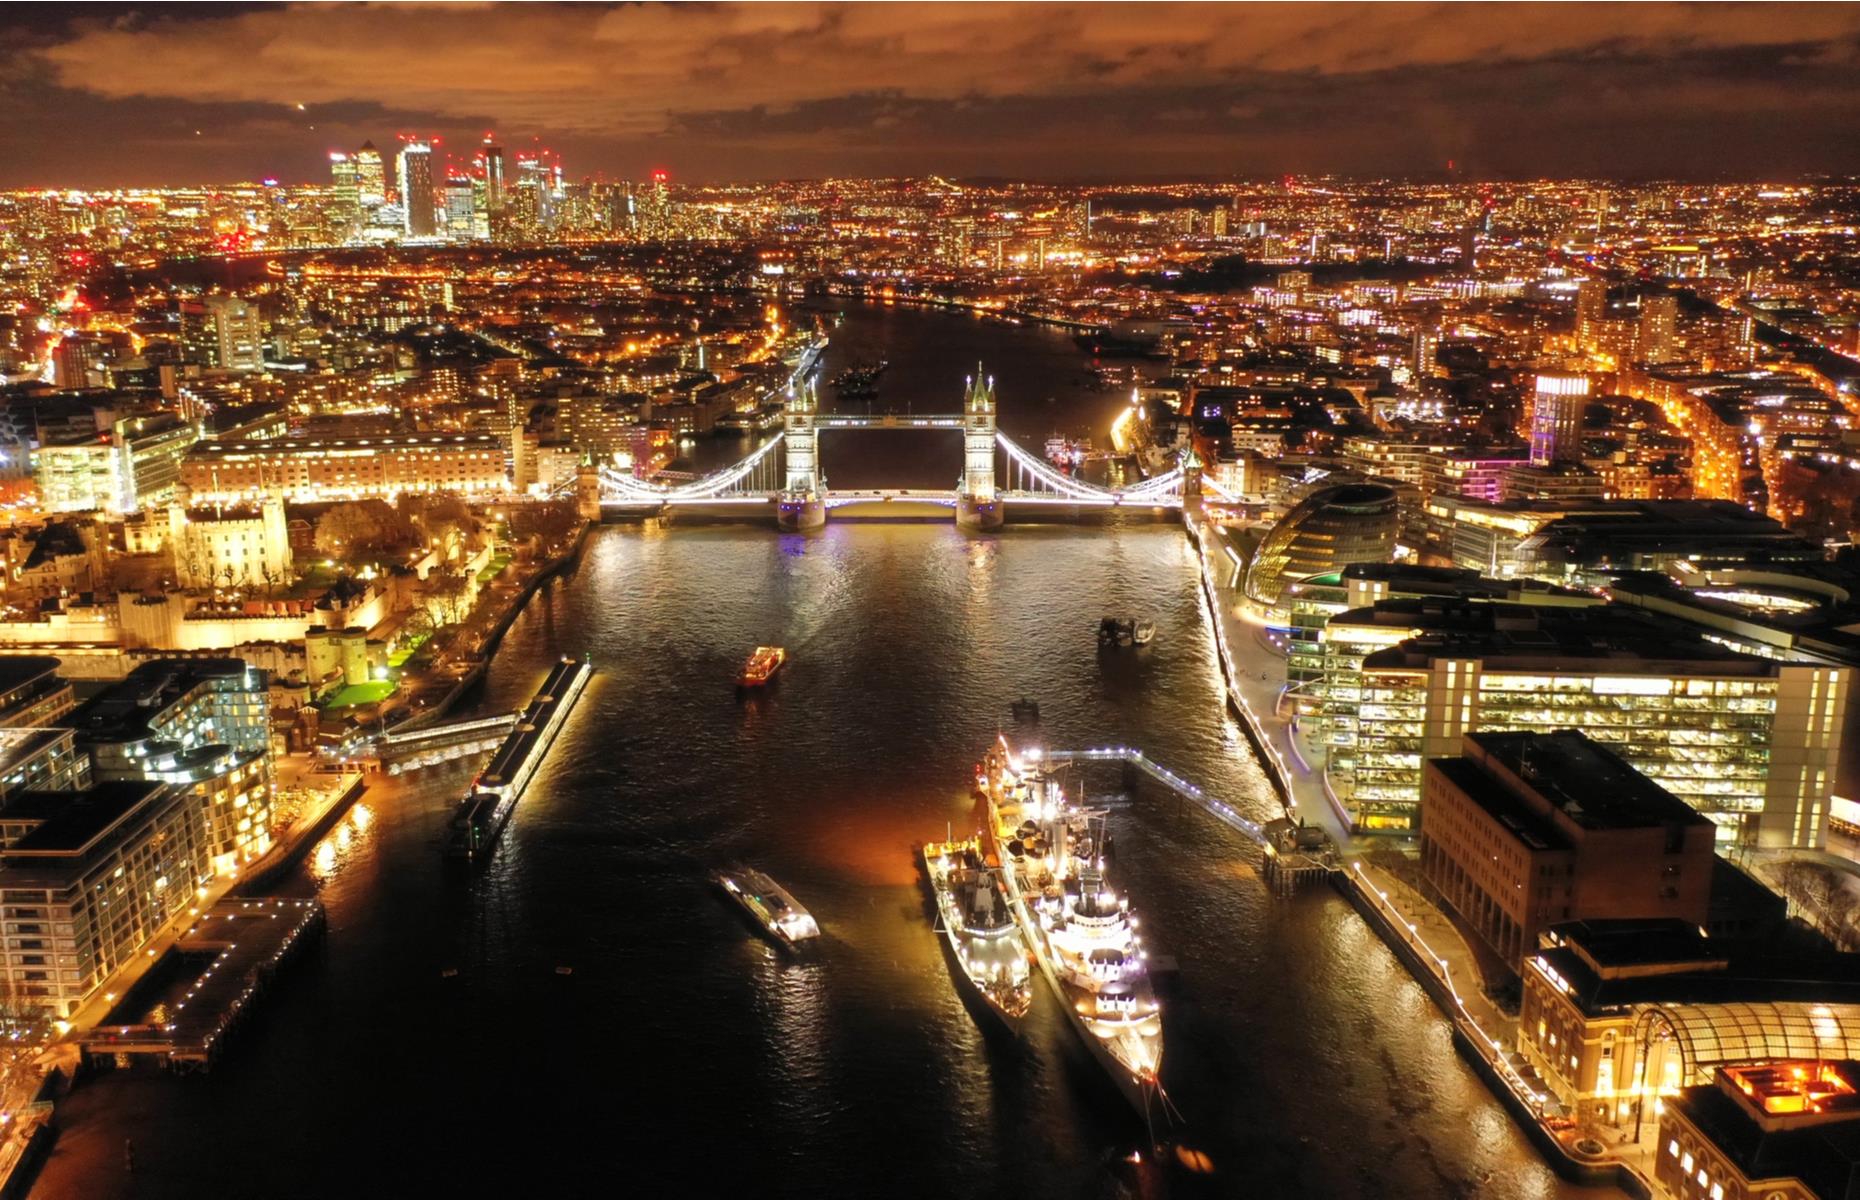 London’s iconic Tower Bridge was built at the end of the 19th century as a result of an open competition that saw more than 50 designs submitted. The winning entry, which consists of a high-level and low-level walkway sandwiched between two neo-Gothic towers, has become a beloved part of the city’s skyline ever since. Seen from a drone-eye view in this night-time photograph, the cityscape is a seamless fusion of old and new.